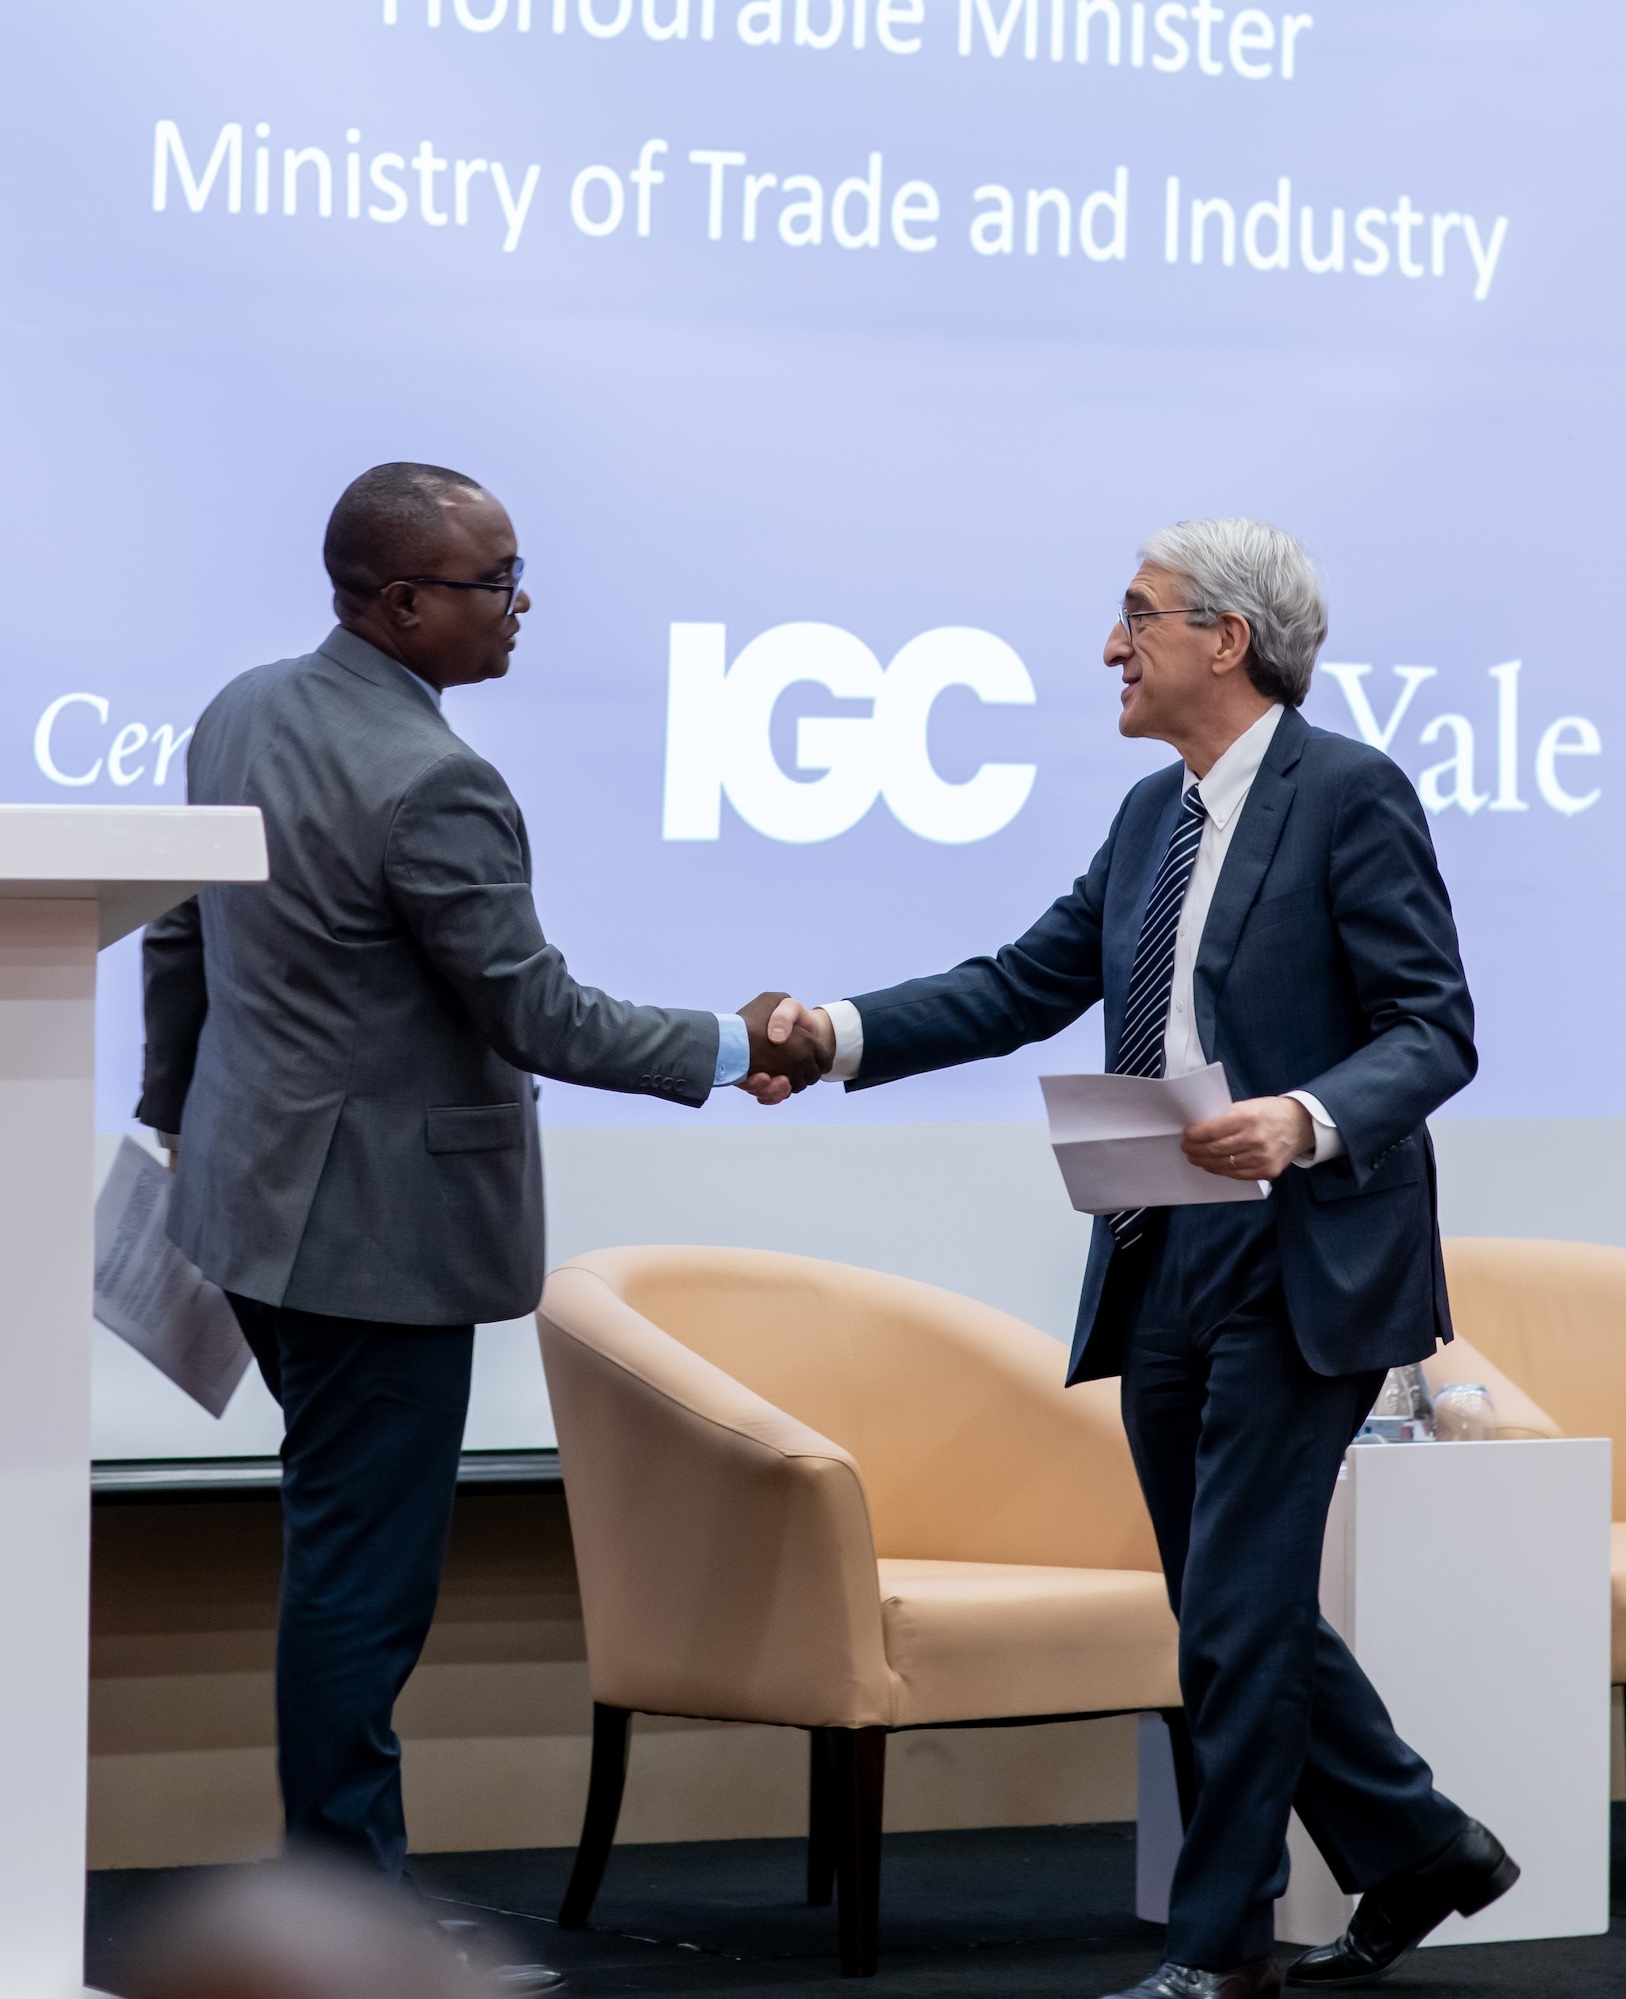 Dr. Jean Chrysostome Ngabitsinze, Rwanda’s Minister of Trade and Industry, shaking hands with Peter Salovey